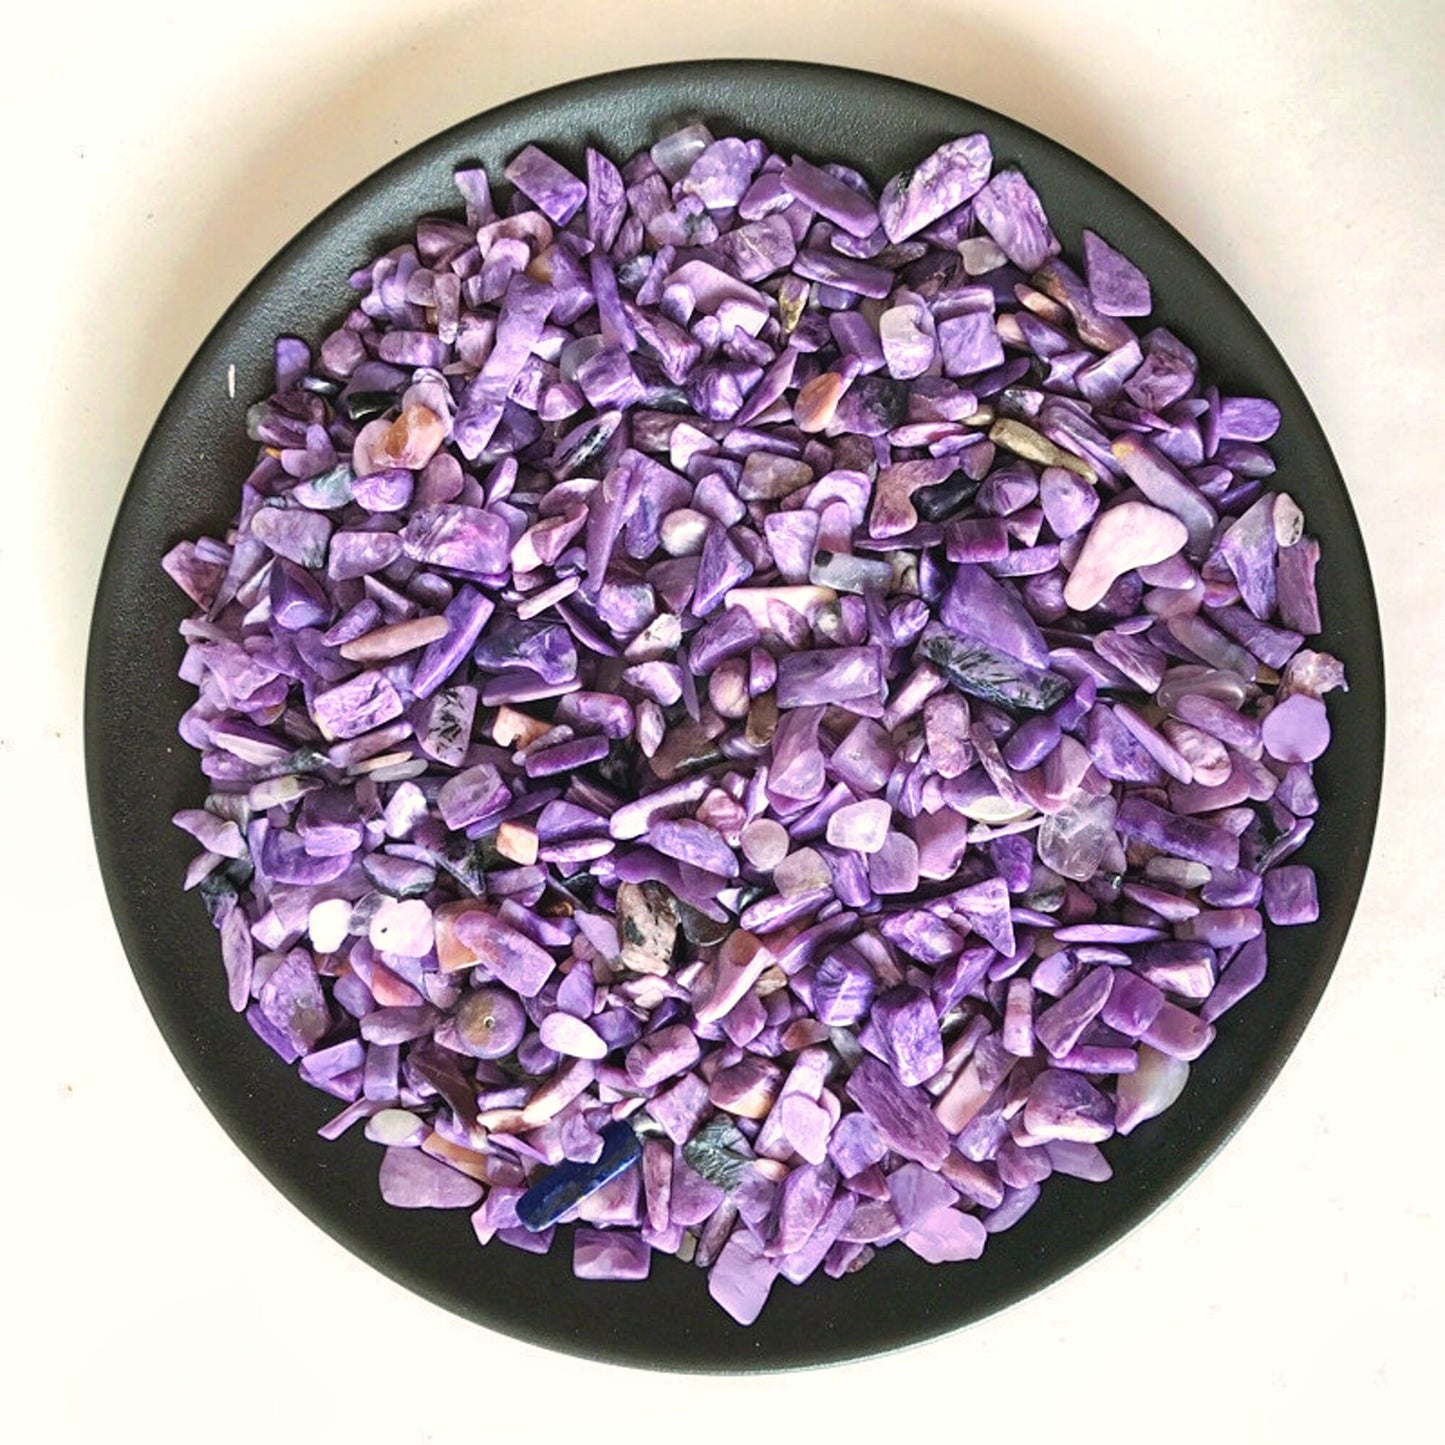 100g Charoite Crystal Gravel - Raw Gemstone Quartz Rock for Healing - Natural and Perfect Gift